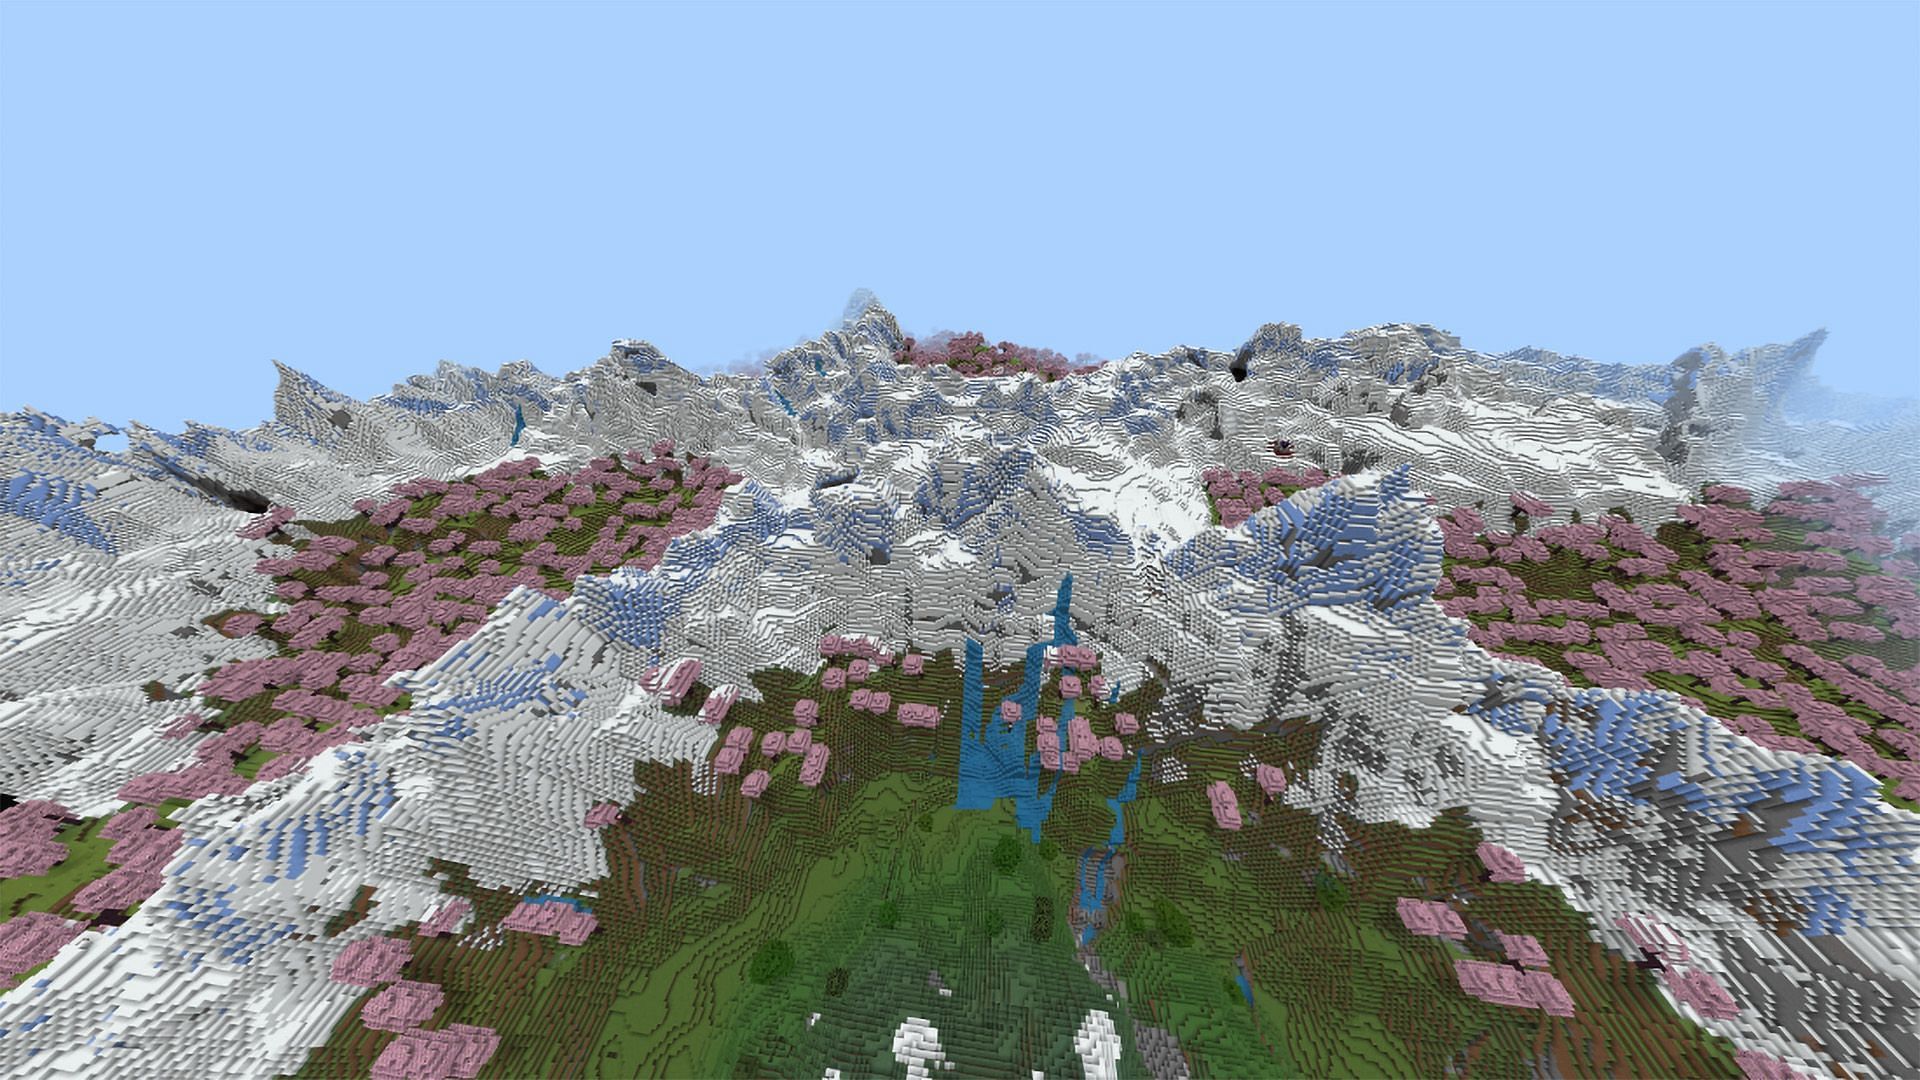 The wondrous generation of dense cherry grove biome with the snow-clad peaks in Minecraft (Image via Mojang)